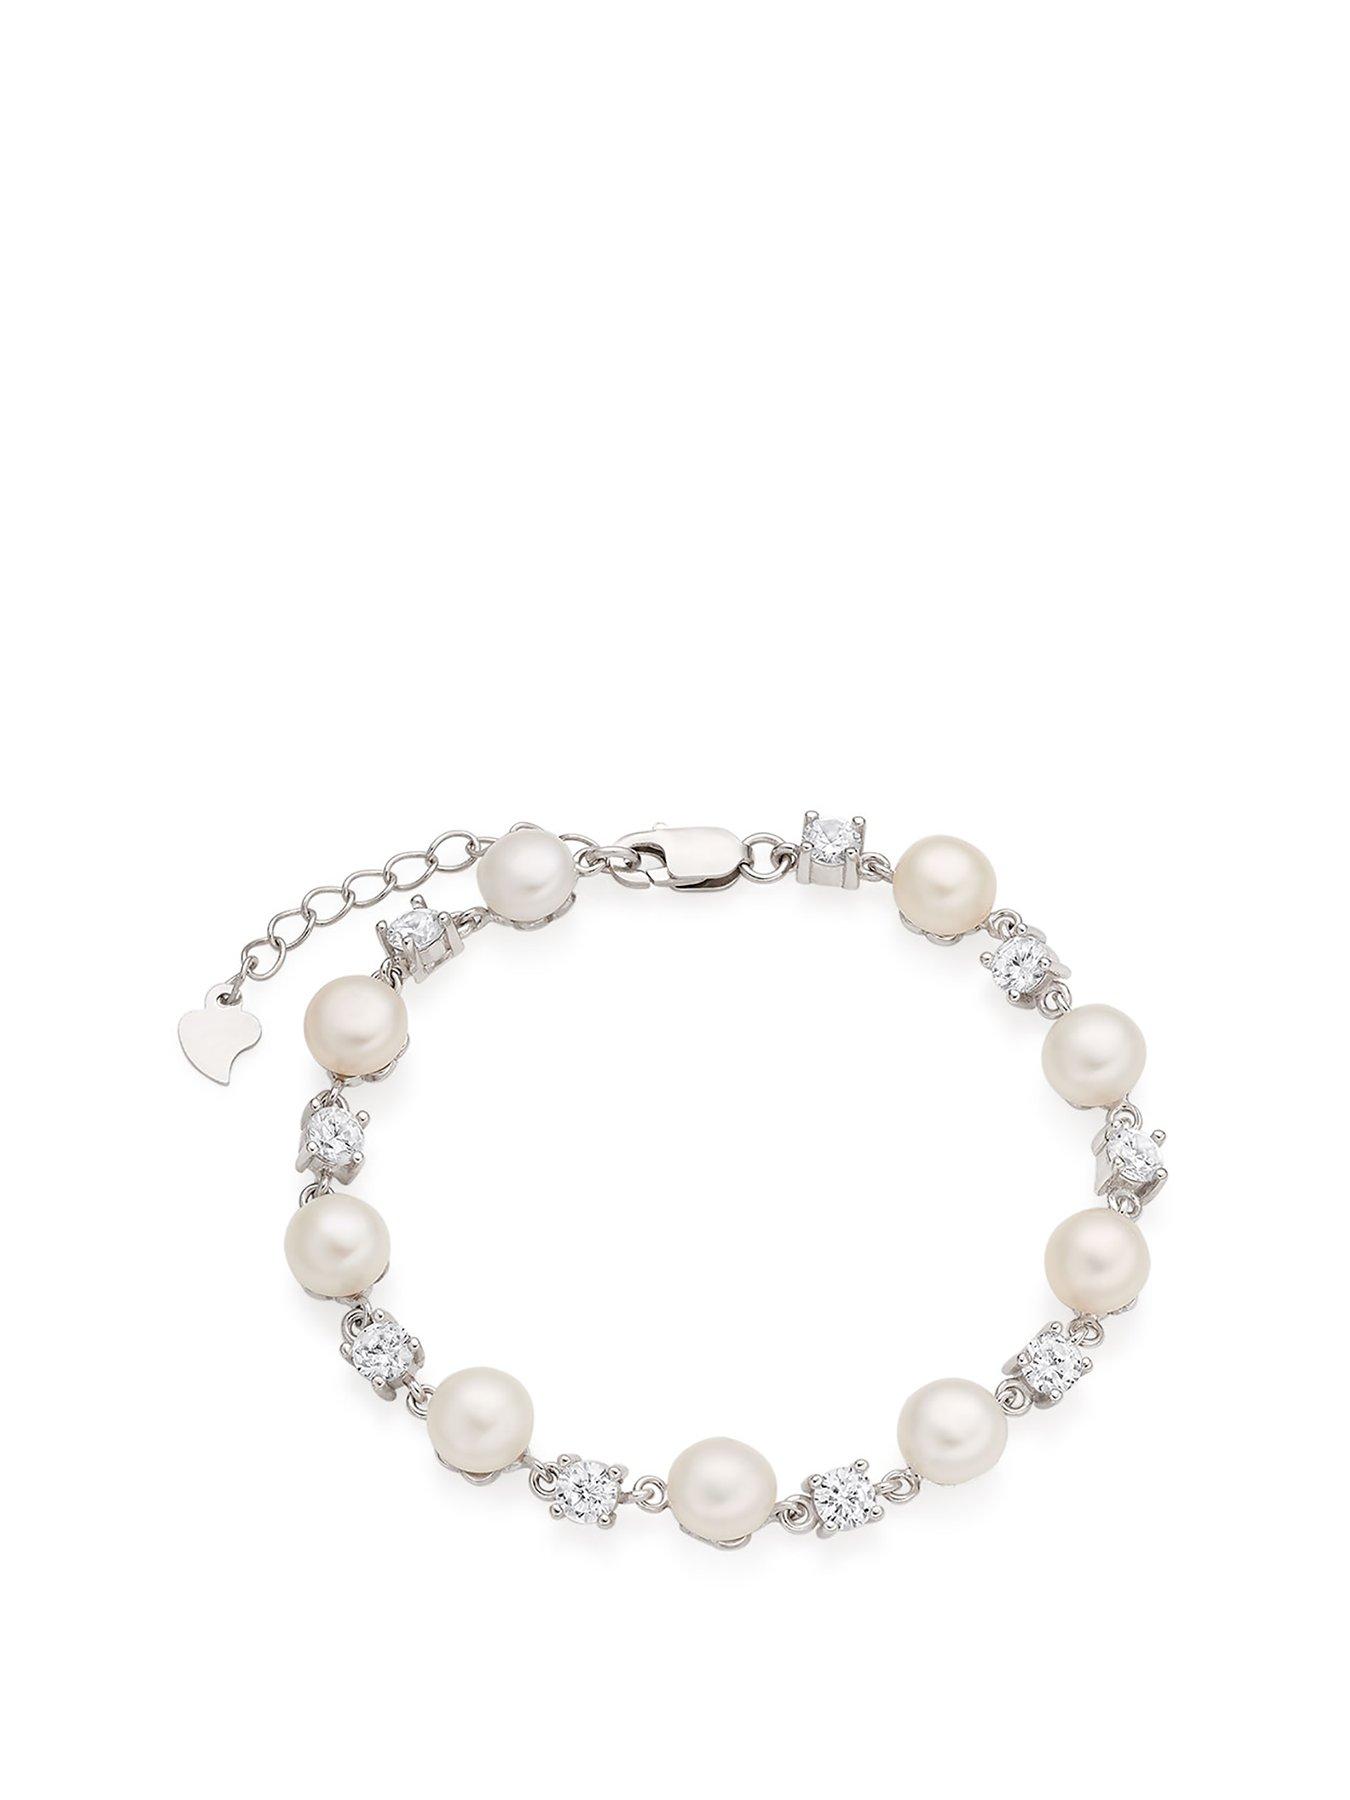  Silver Cubic Zirconia and Freshwater Pearl Bracelet